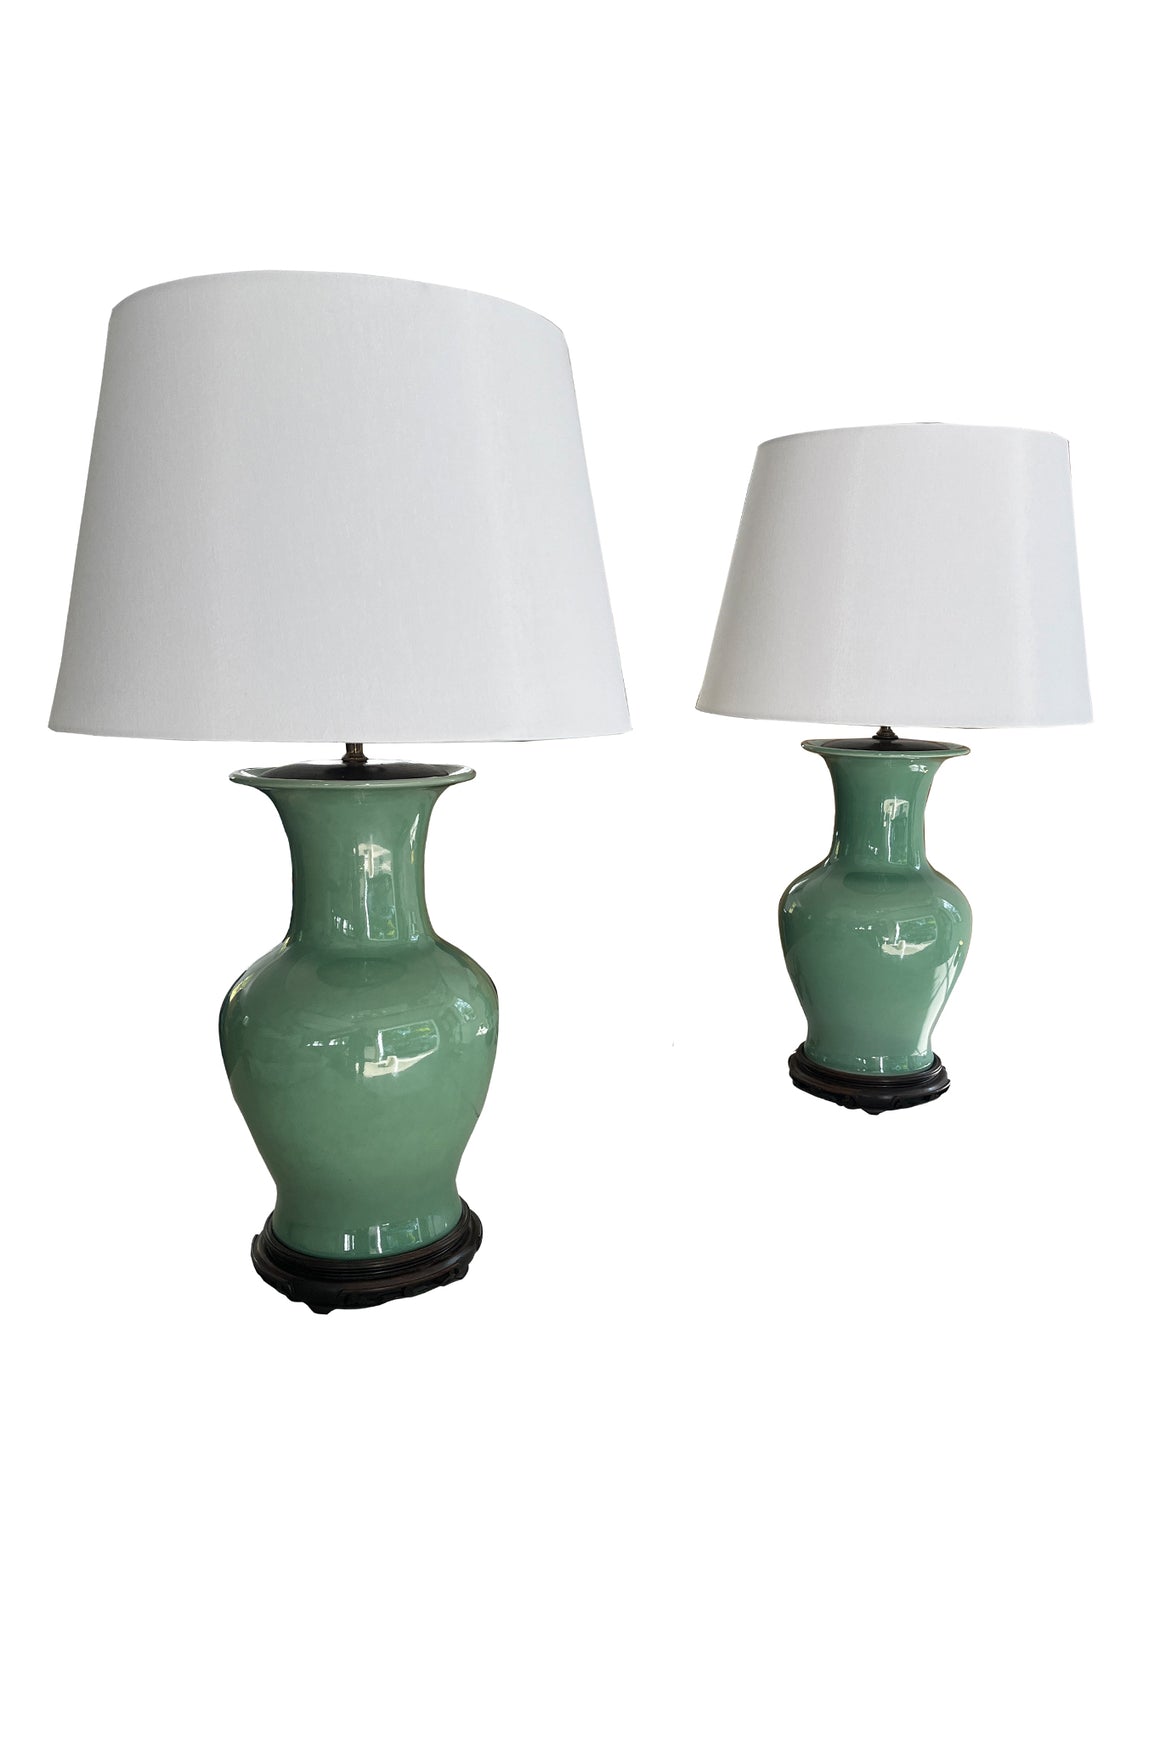 Pair of Mid-Century Ginger Jar Celadon Table Lamps